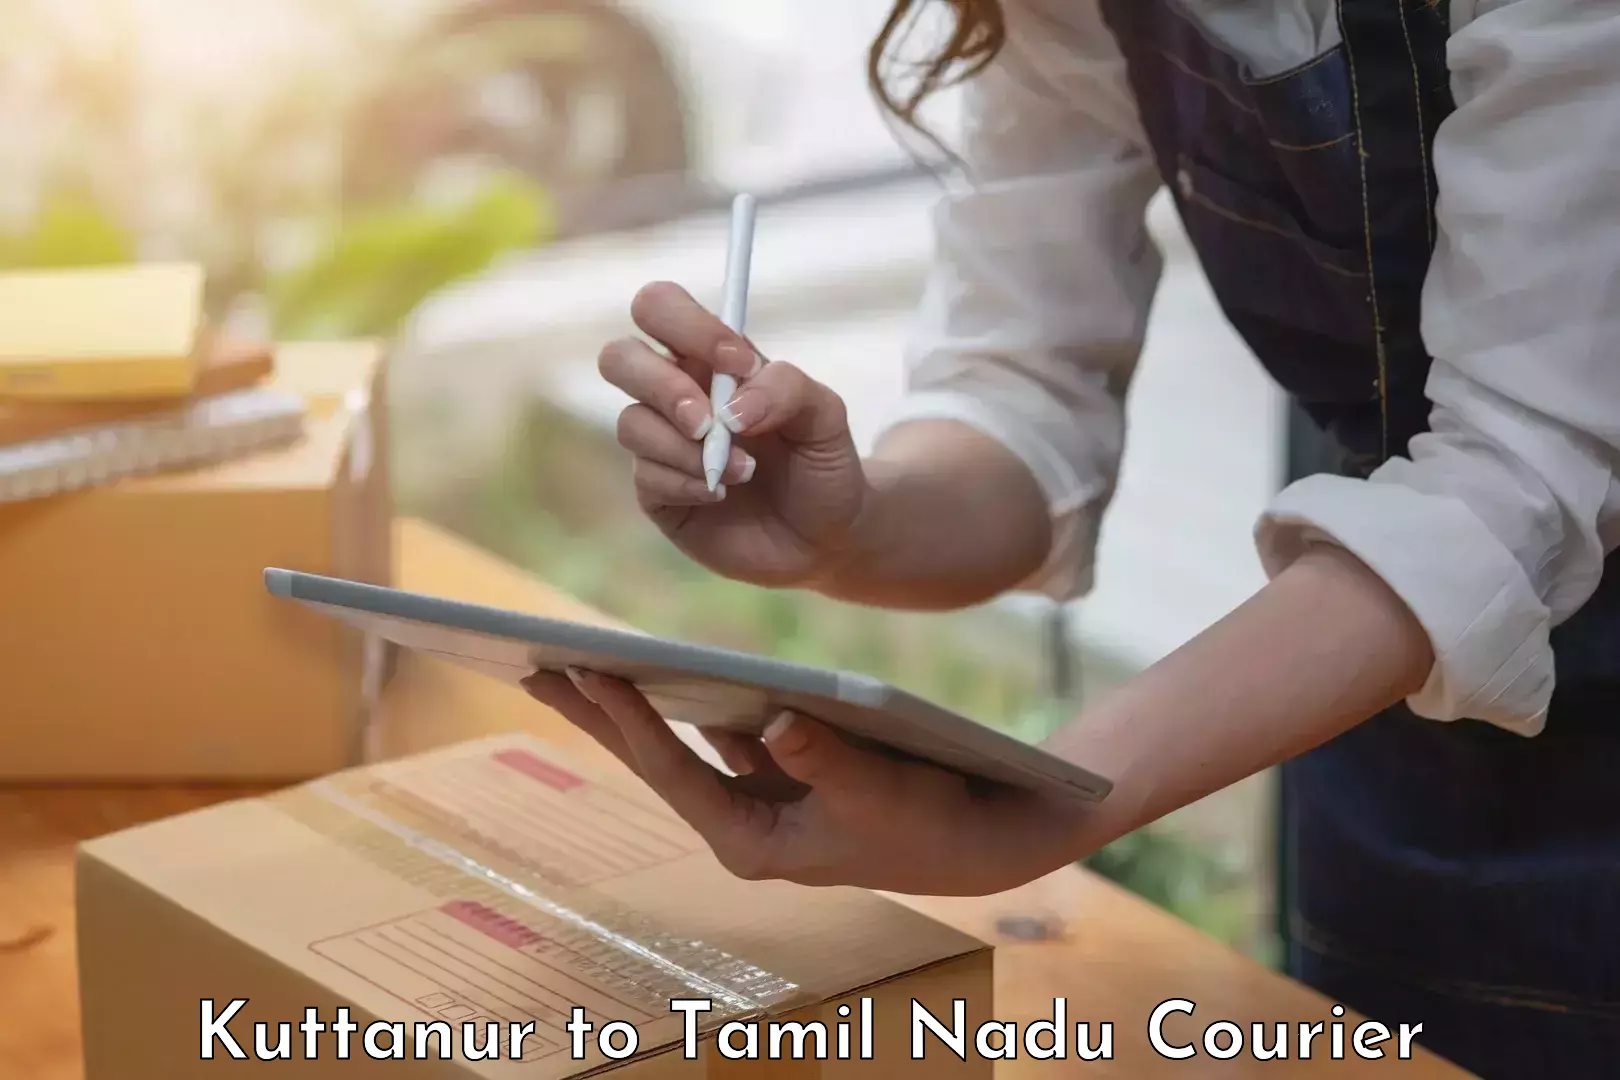 Furniture delivery service Kuttanur to Tamil Nadu Agricultural University Coimbatore